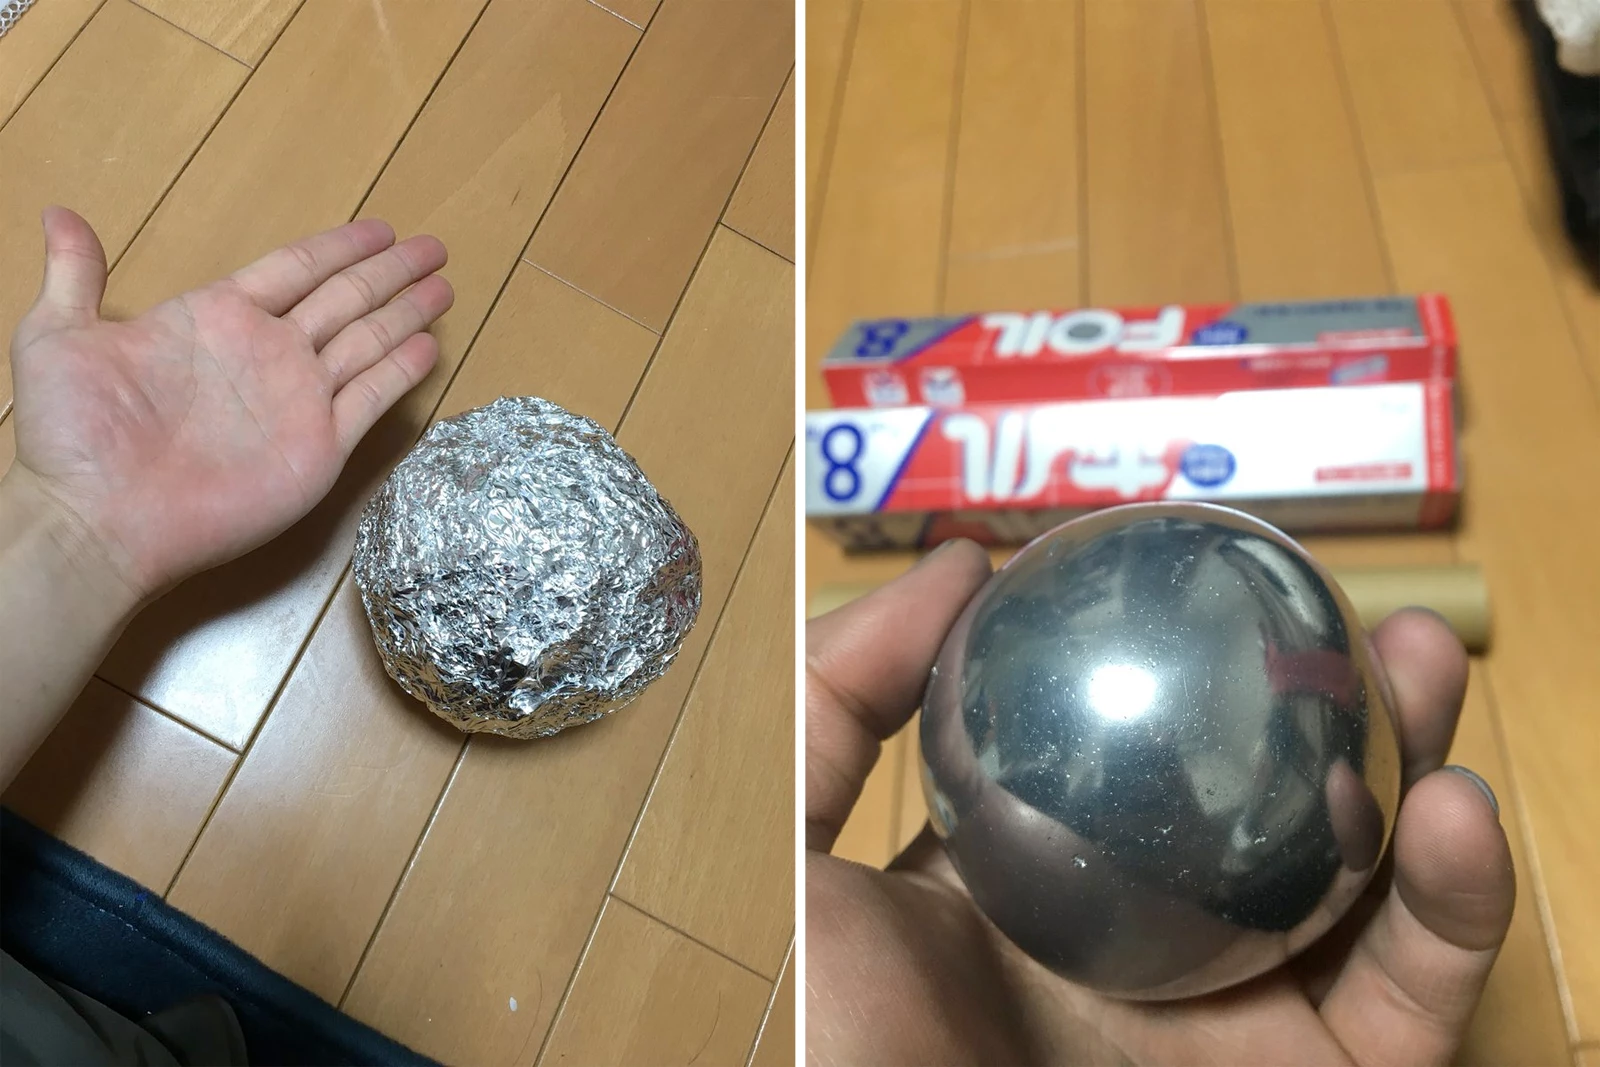 People Are Microwaving Foil Balls to Smooth Them Out